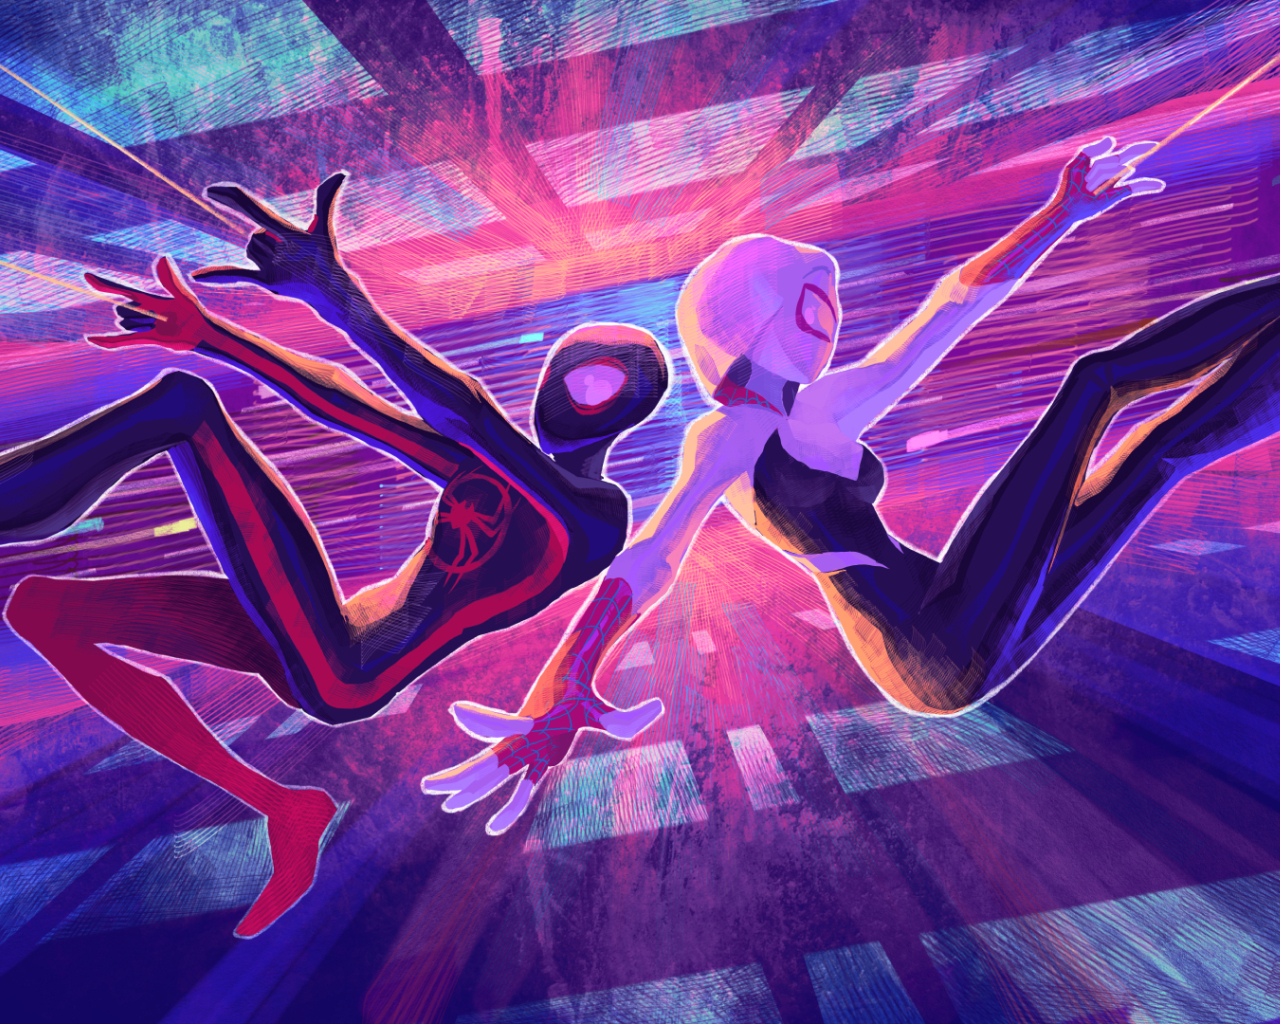 1280x1024 Resolution Miles Morales & Gwen Stacy The Spider-Verse ...